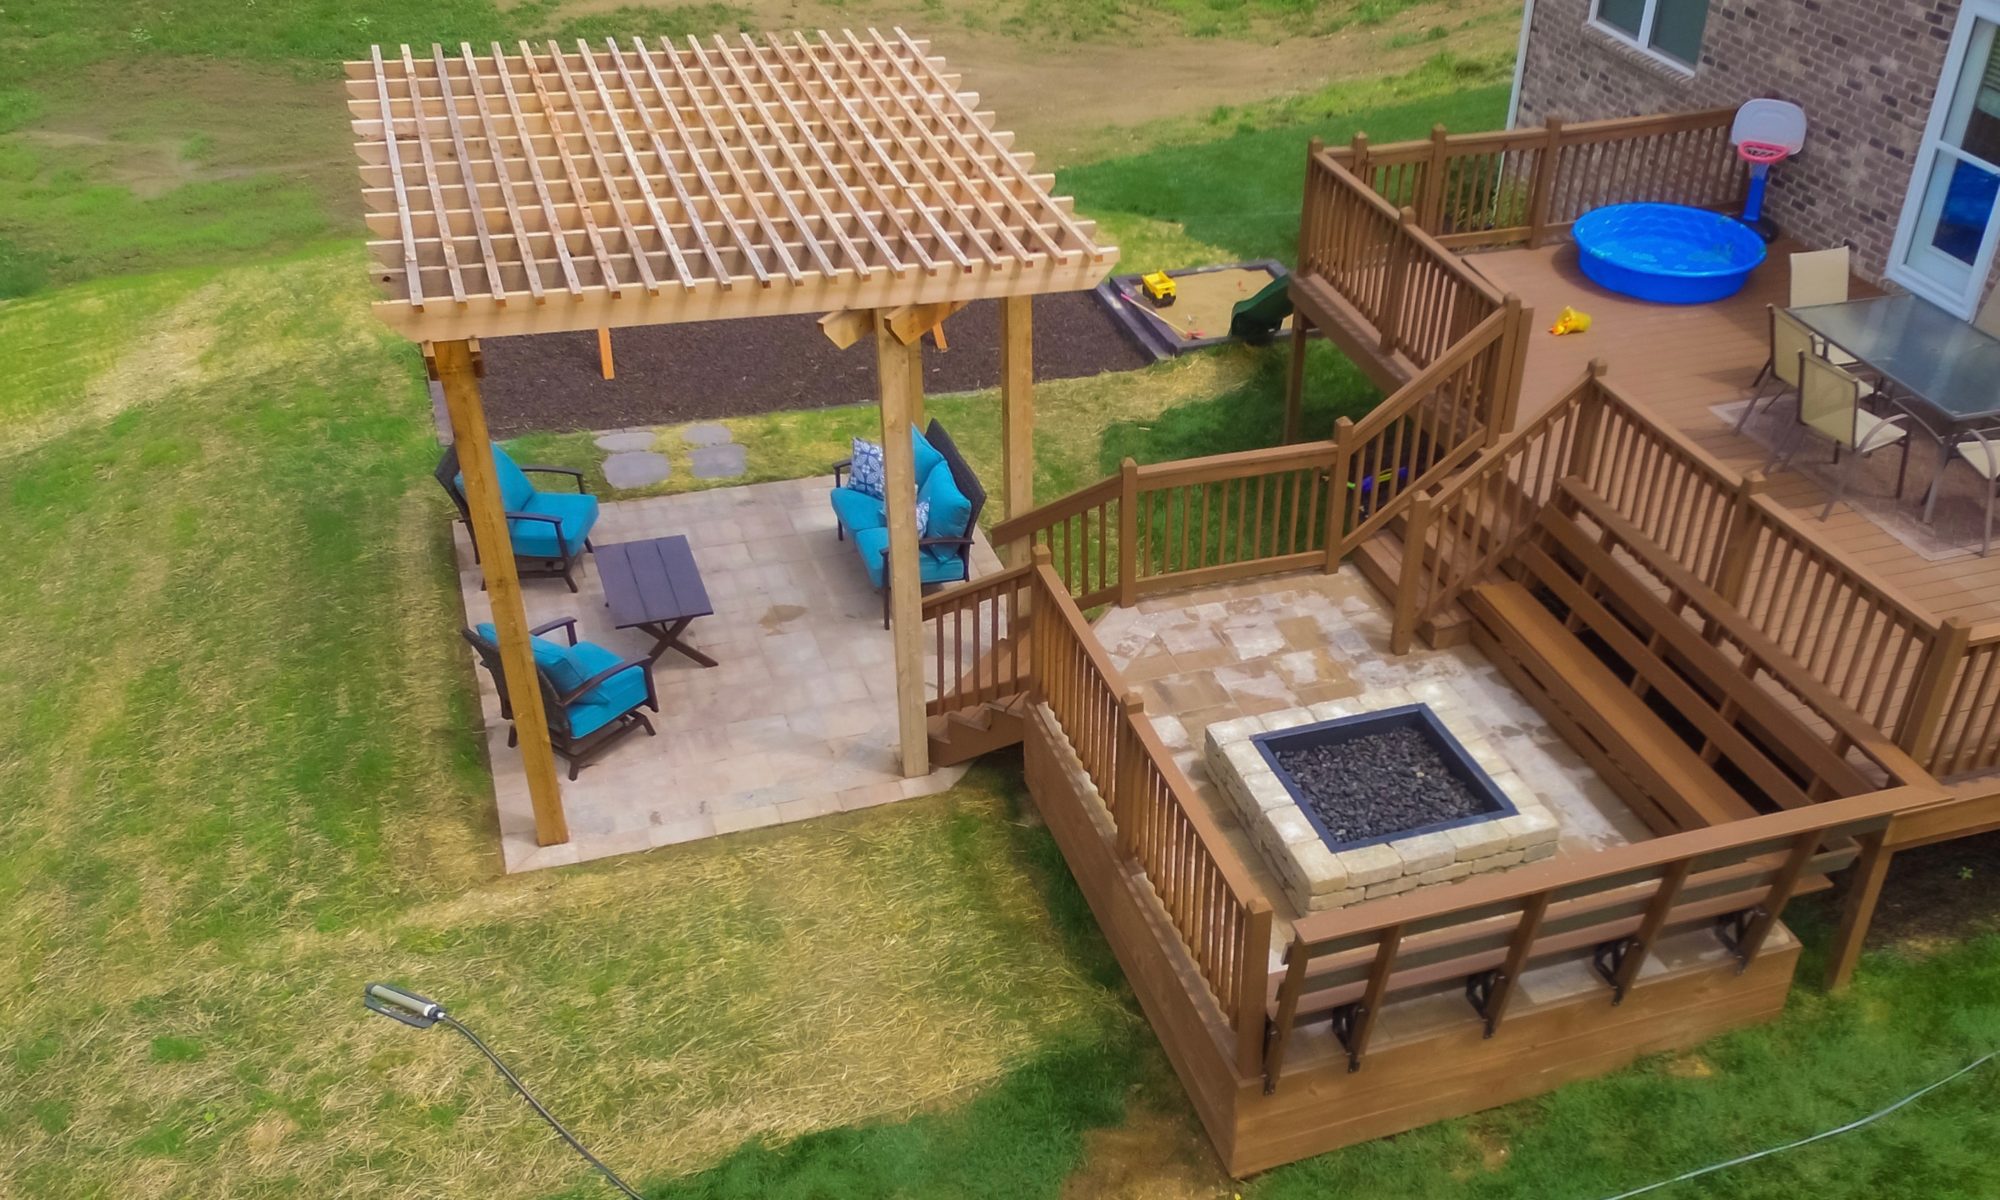 Precision Outdoors Fishers Pergola & Firepit cedar pergola structure firm paver patio beggar lafitt rustic slab Danville beige color accents wrap around firepit bench seating kids play area slide built in built-in deck sandbox play pad surrounding swing set area fishers indiana playground